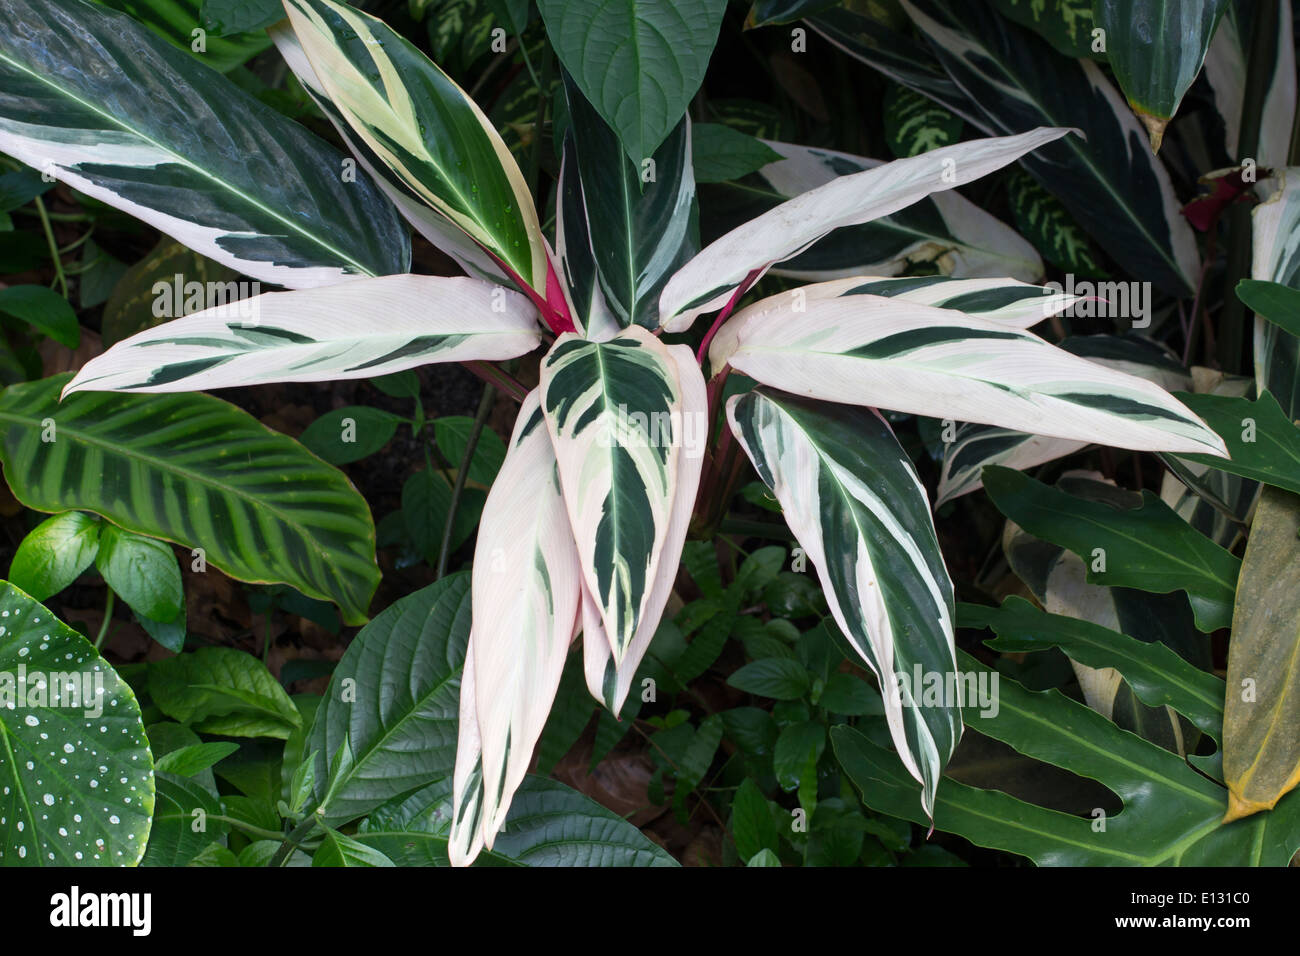 Exotic variegated foliage of the tropical plant, Stromanthe sanguinea 'Triostar' Stock Photo